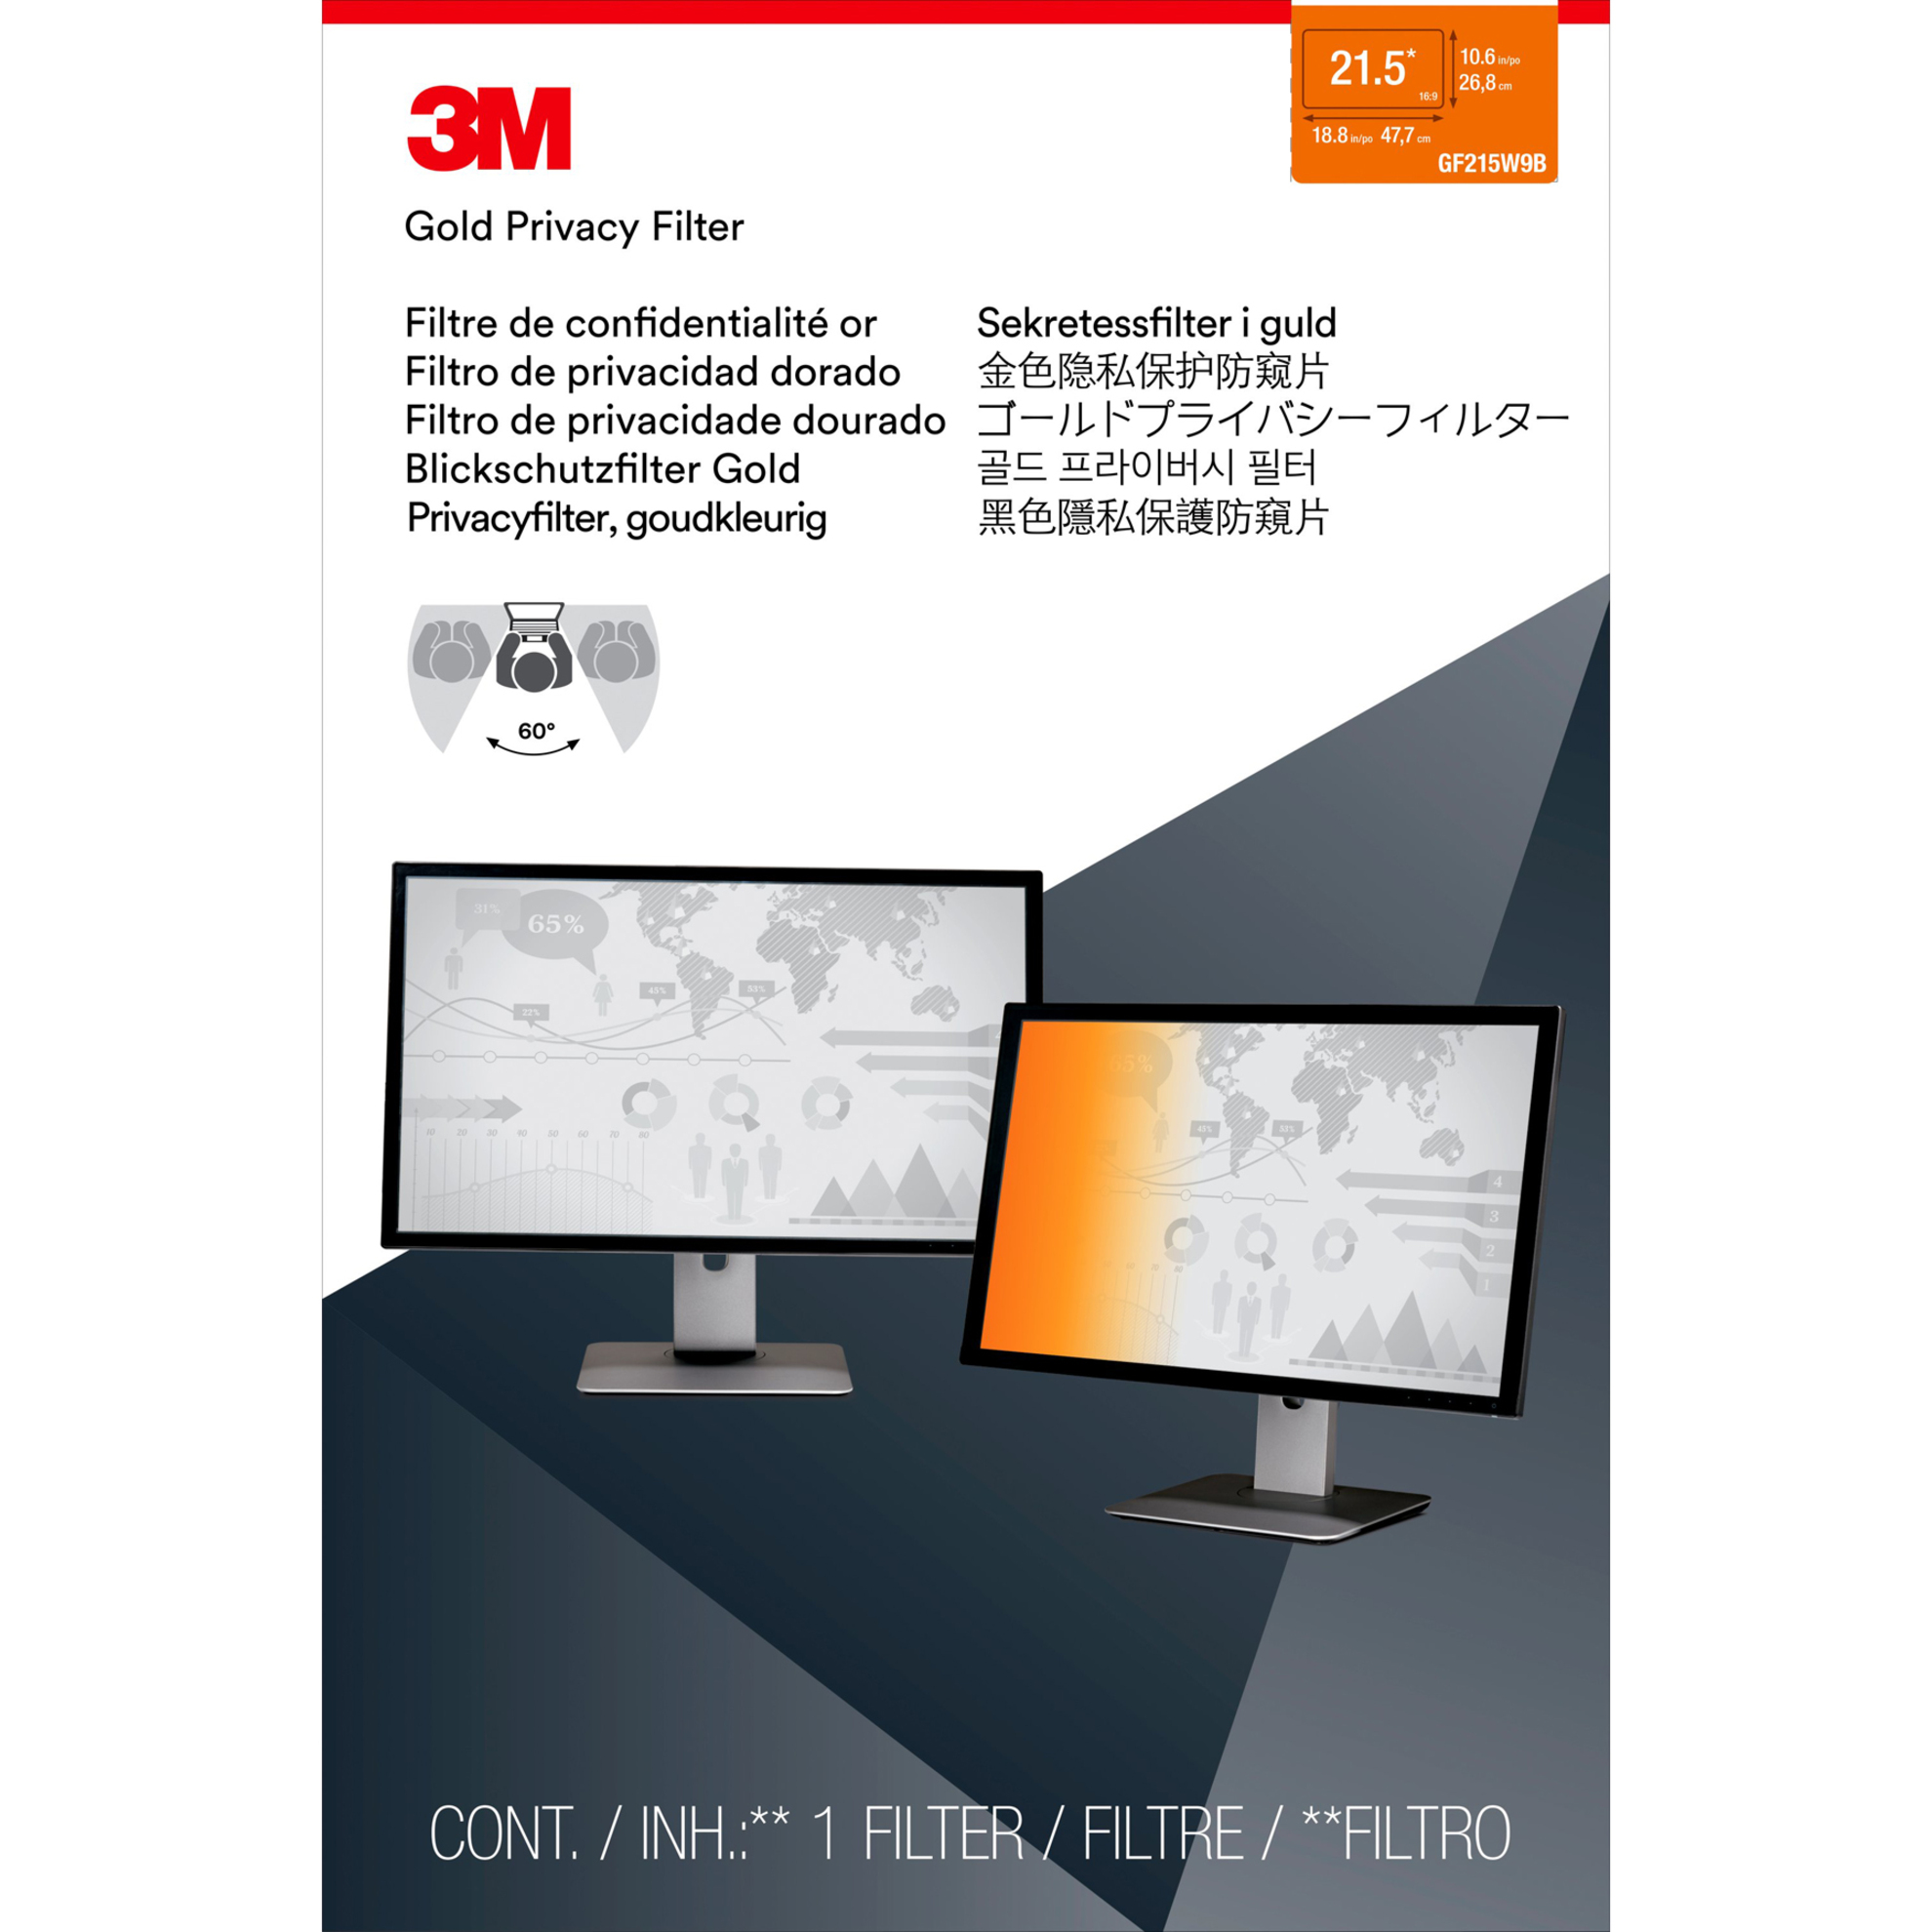 3M GF215W9B 16:9 Frameless Privacy Filter for 21-1/2 in. Flat Panel Monitors - Gold - image 2 of 2